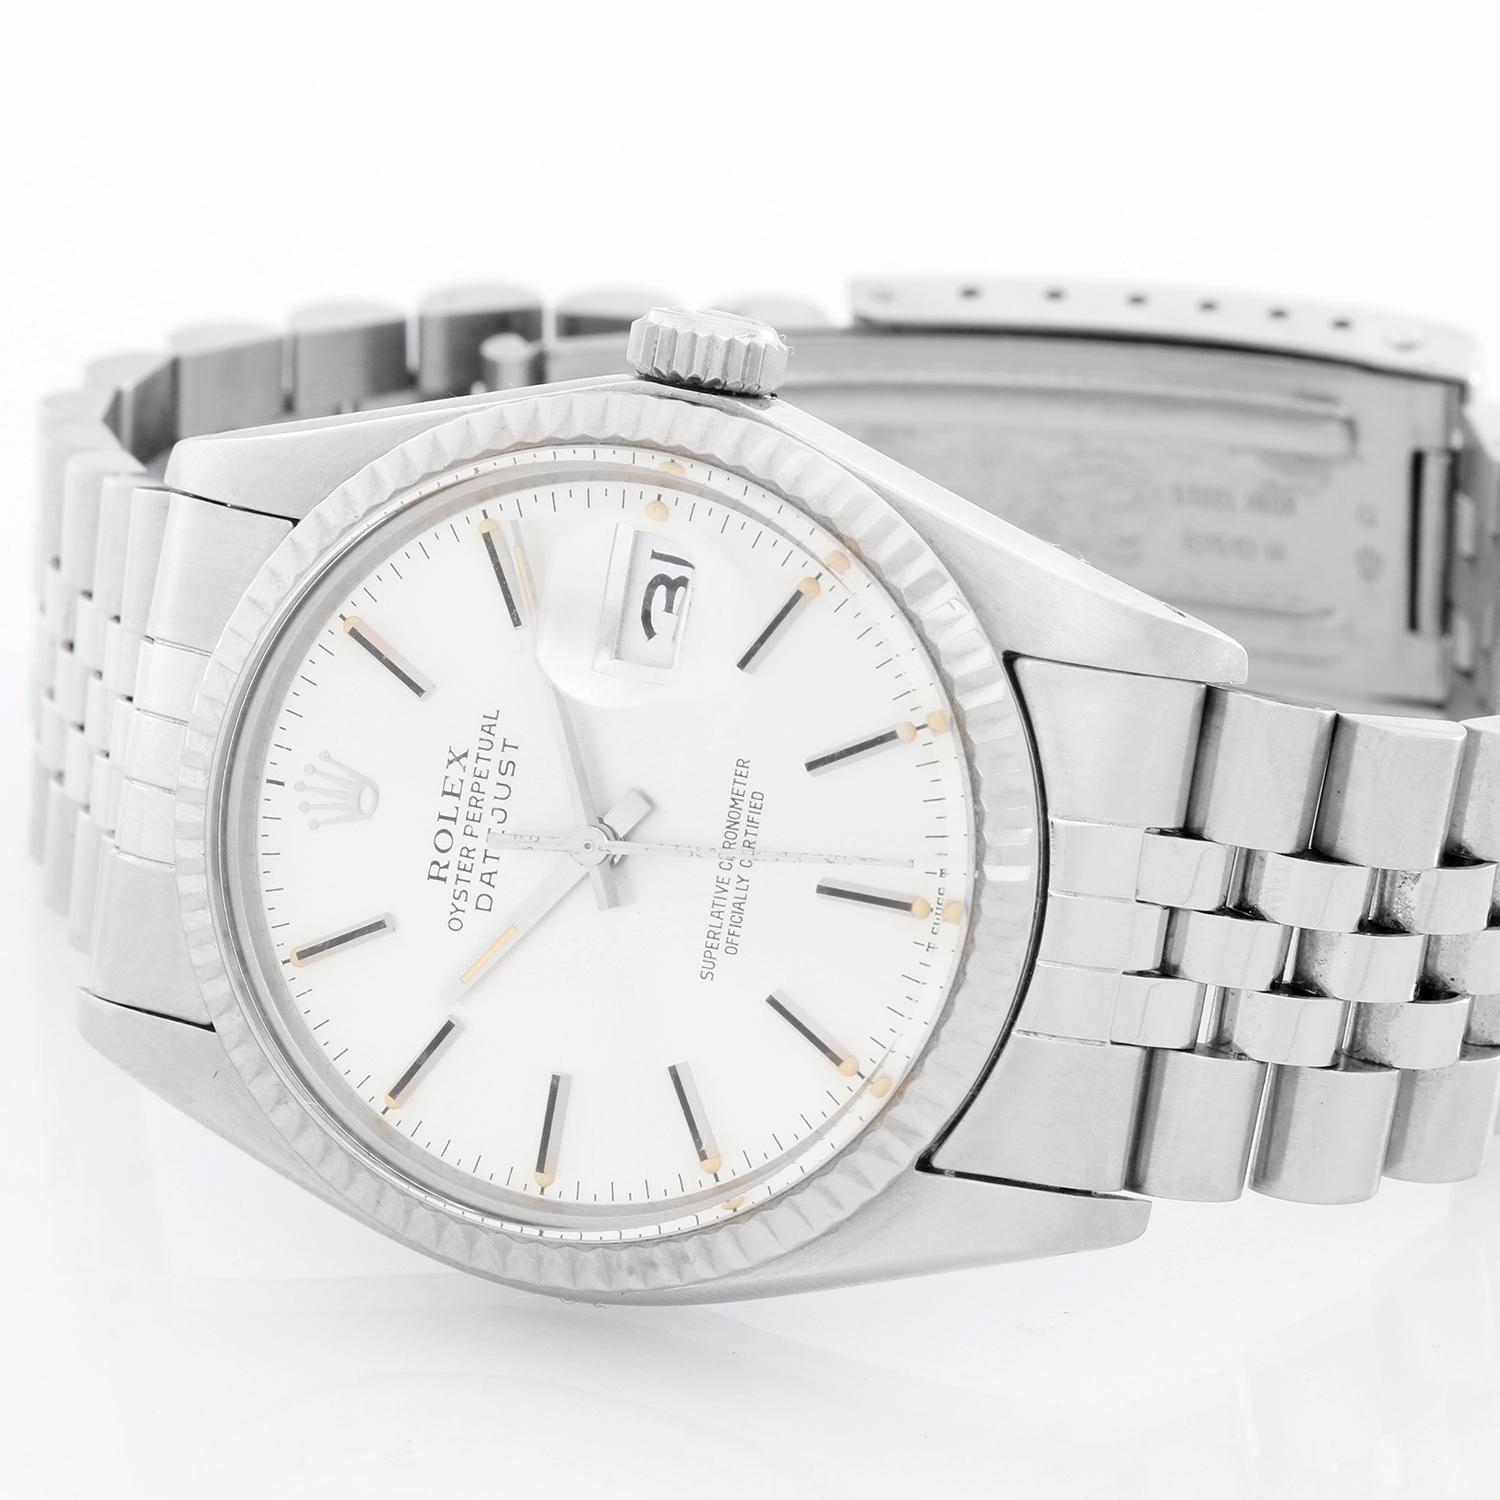 Rolex Datejust Men's Stainless Steel Watch Silver Dial 16014 - Automatic winding, 27 jewels, Quickset, acrylic crystal. Stainless steel case with white gold Fluted bezel (36mm diameter). Silver dial with stick hour markers . Stainless steel Jubilee